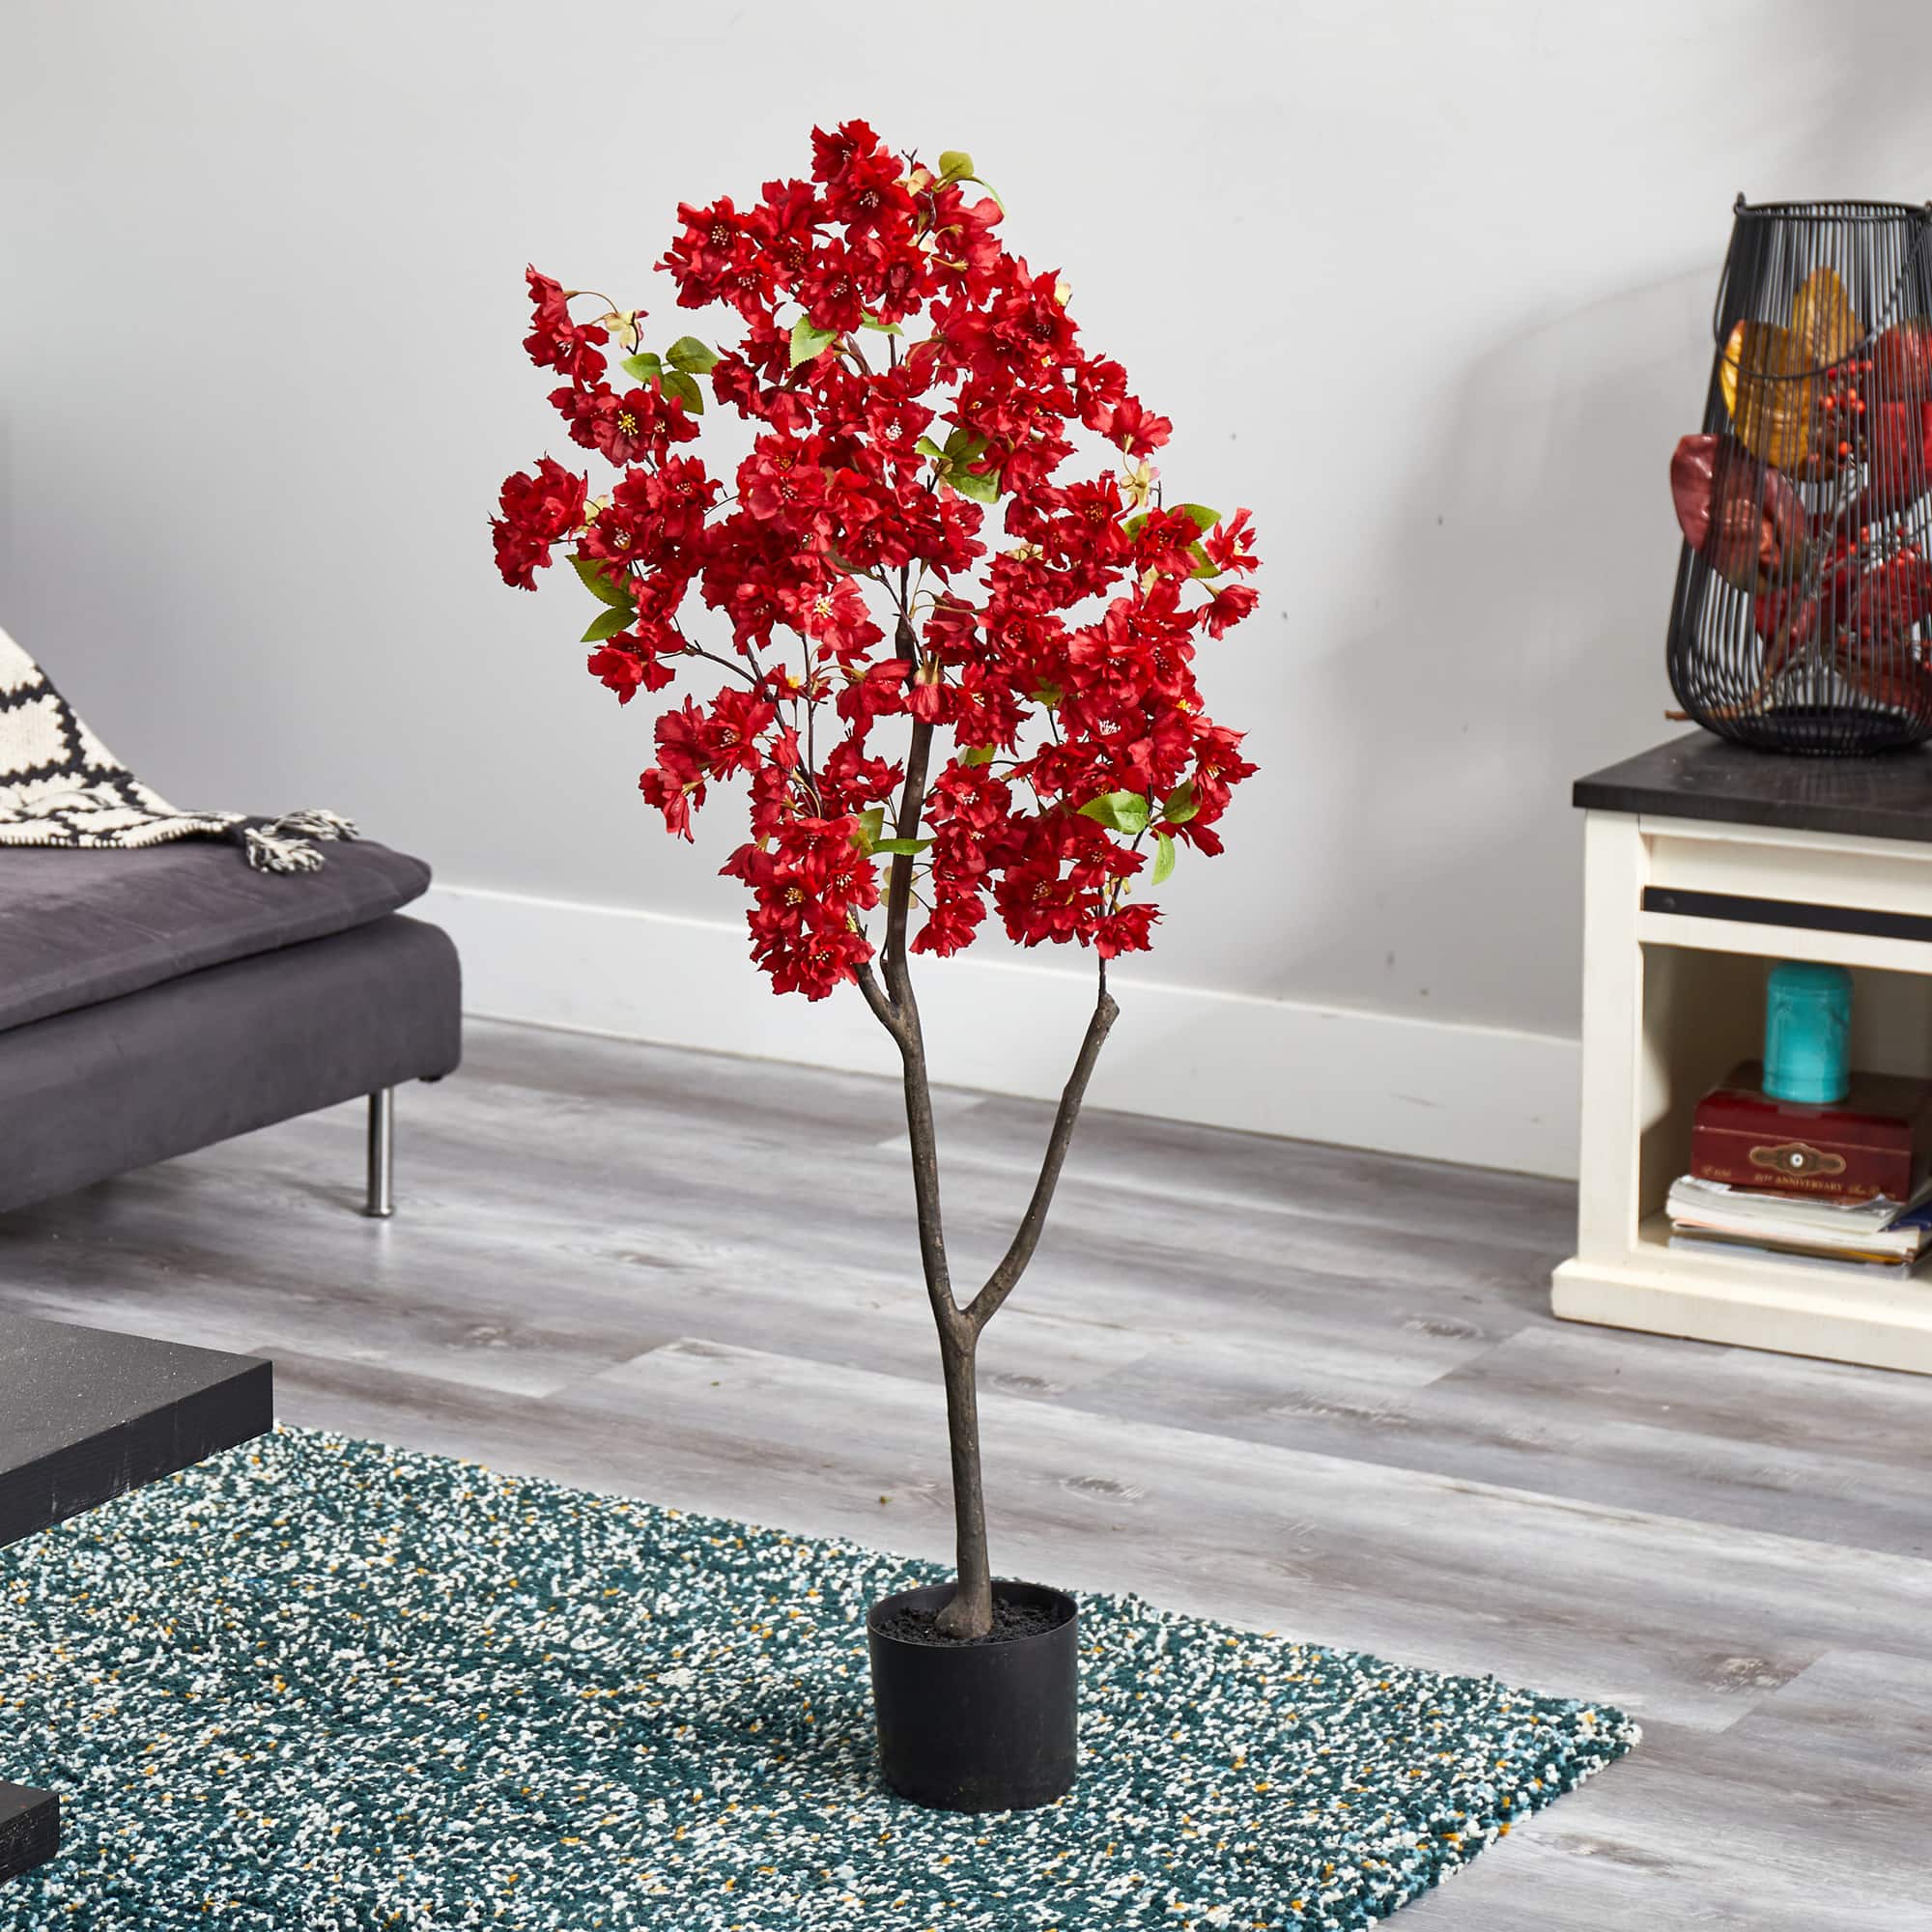 4ft. Potted Red Cherry Blossom Artificial Tree